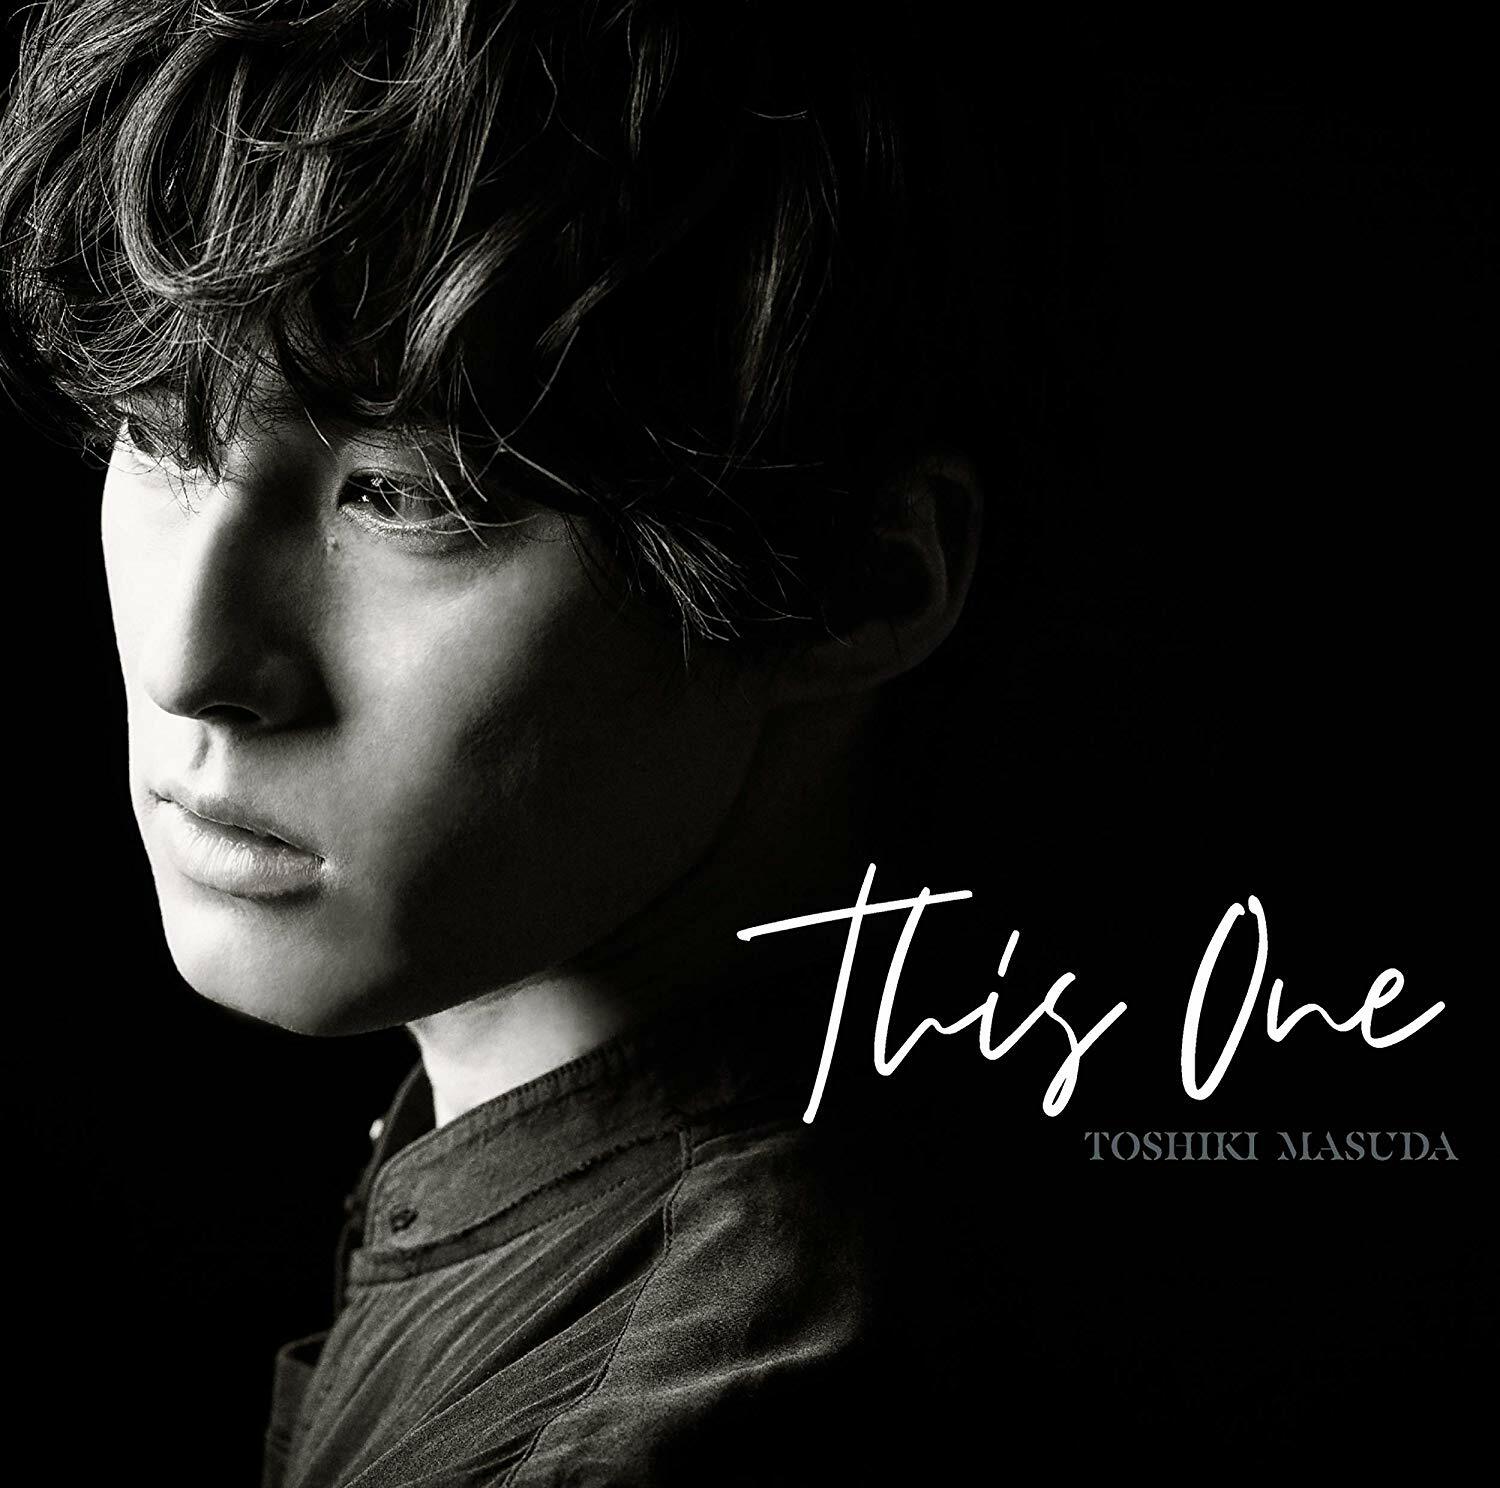 This One (初回限定盤)(CD+DVD) Single, CD+DVD, Limited Edition [CD]